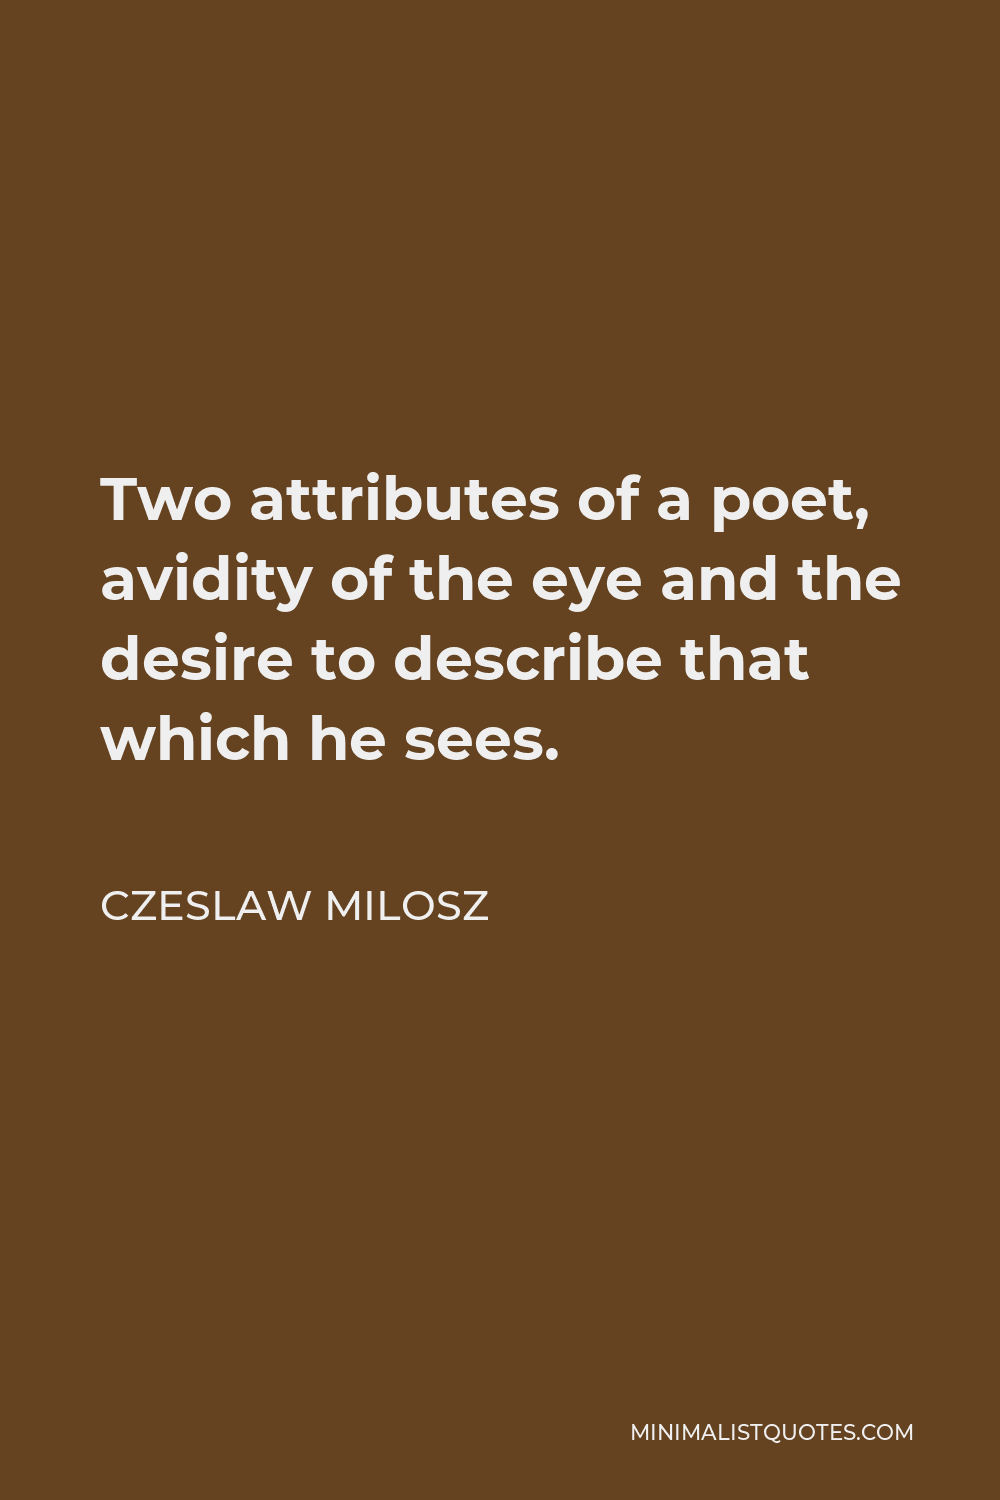 Czeslaw Milosz Quote - Two attributes of a poet, avidity of the eye and the desire to describe that which he sees.